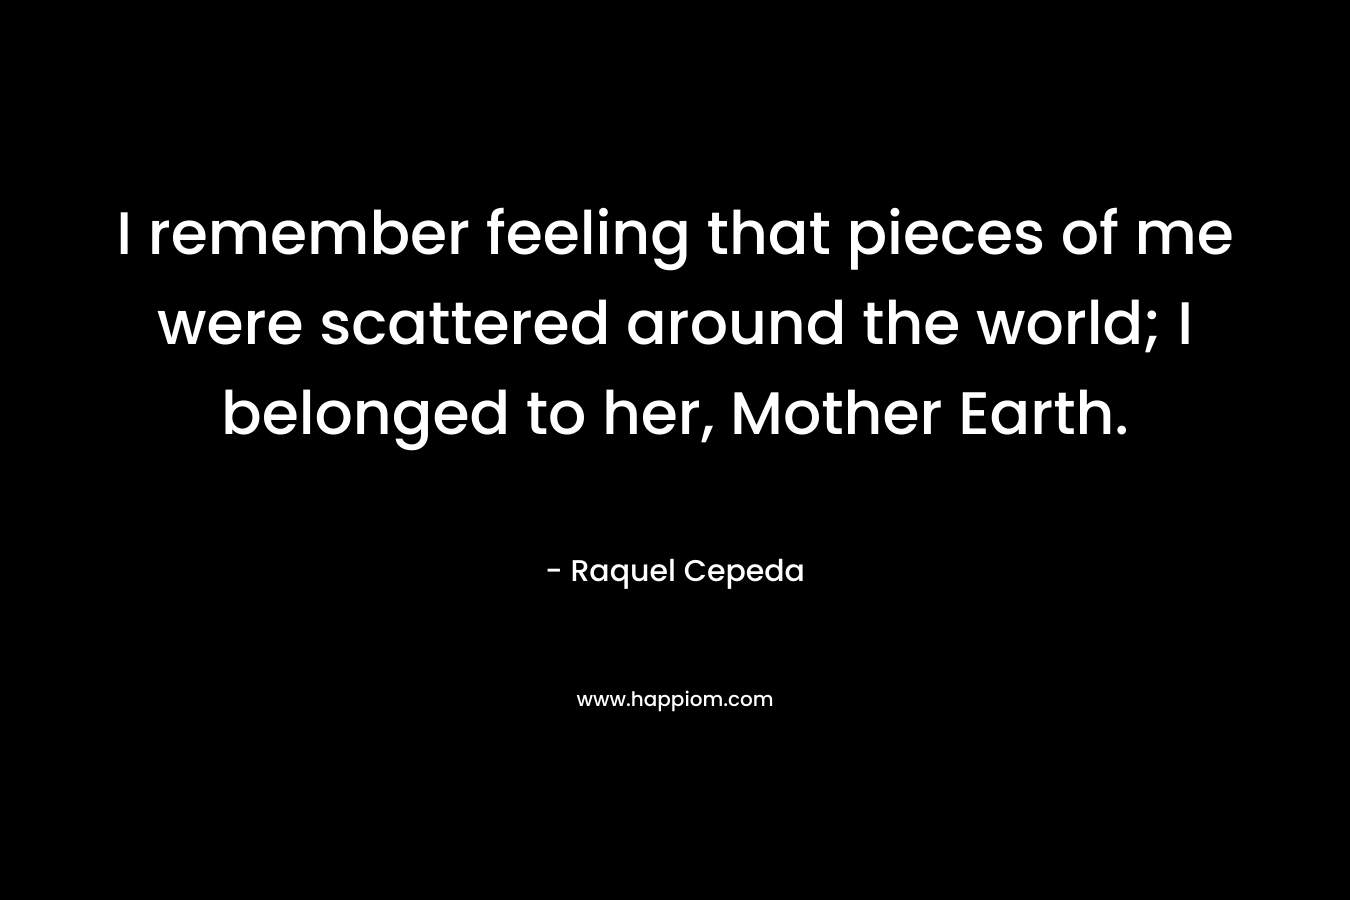 I remember feeling that pieces of me were scattered around the world; I belonged to her, Mother Earth.